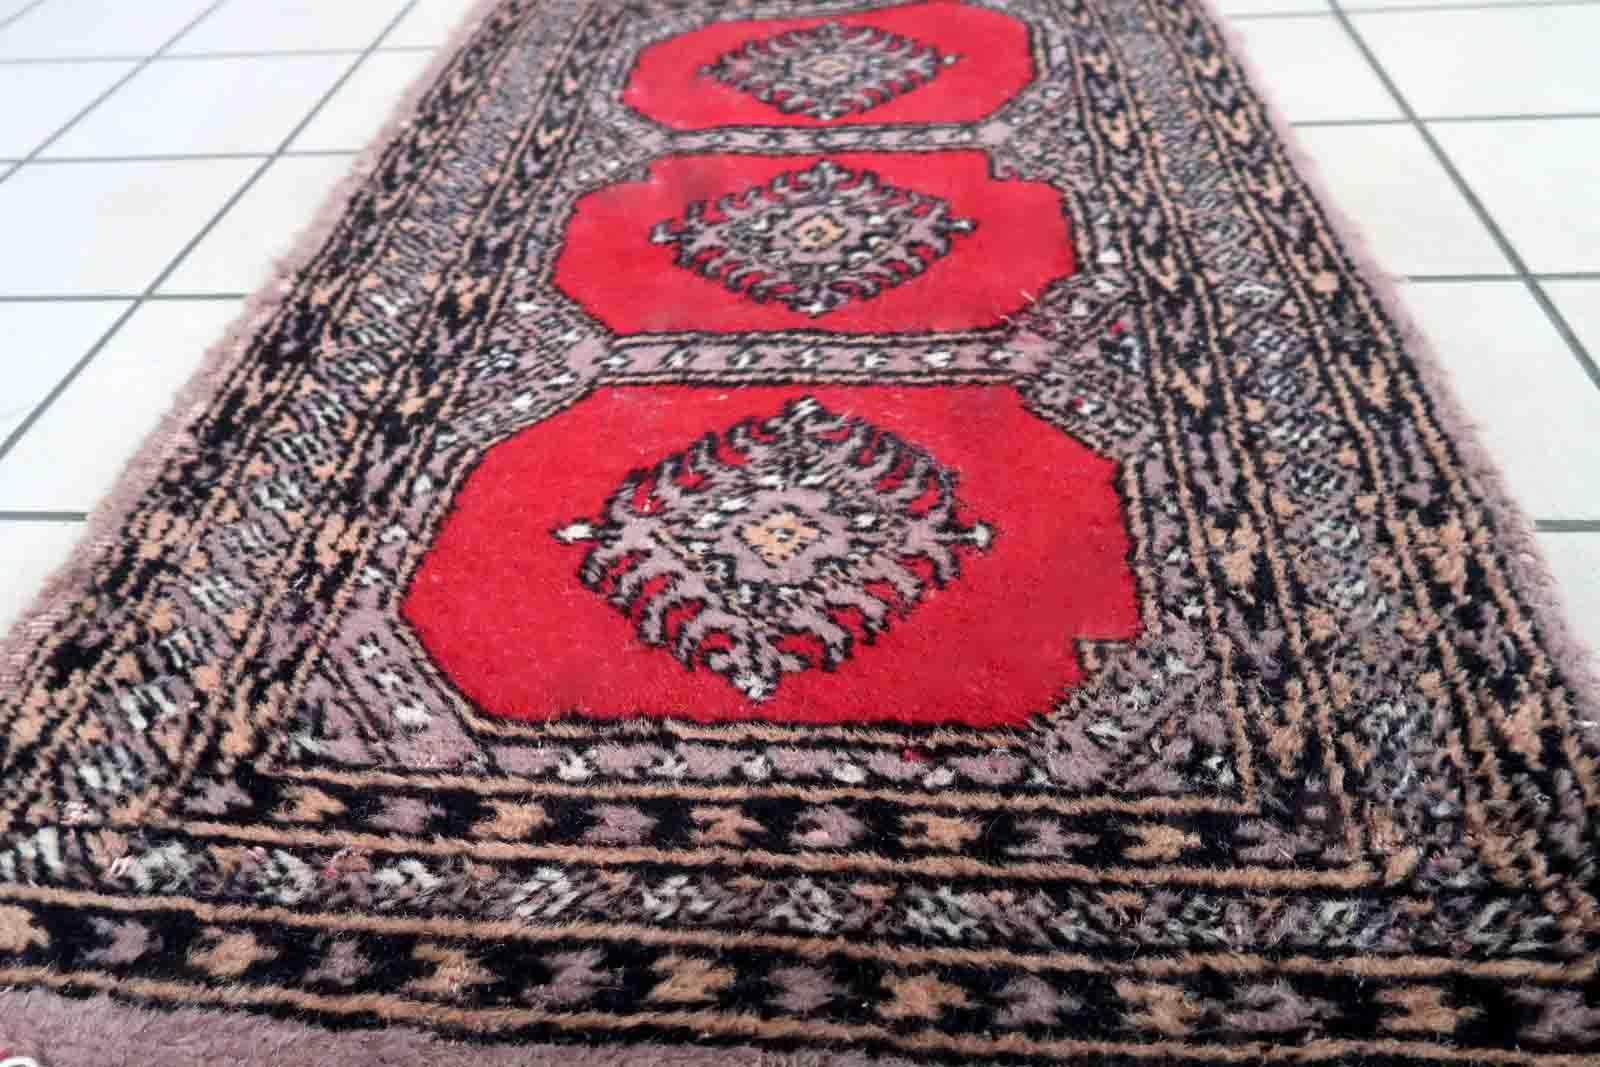 Handmade vintage Uzbek Bukhara rug in traditional design. The rug is from the end of 20th century, it is in original condition, has some signs of age.

-condition: original good,

-circa: 1970s,

-size: 2' x 3.3' (63cm x 103cm),

-material: